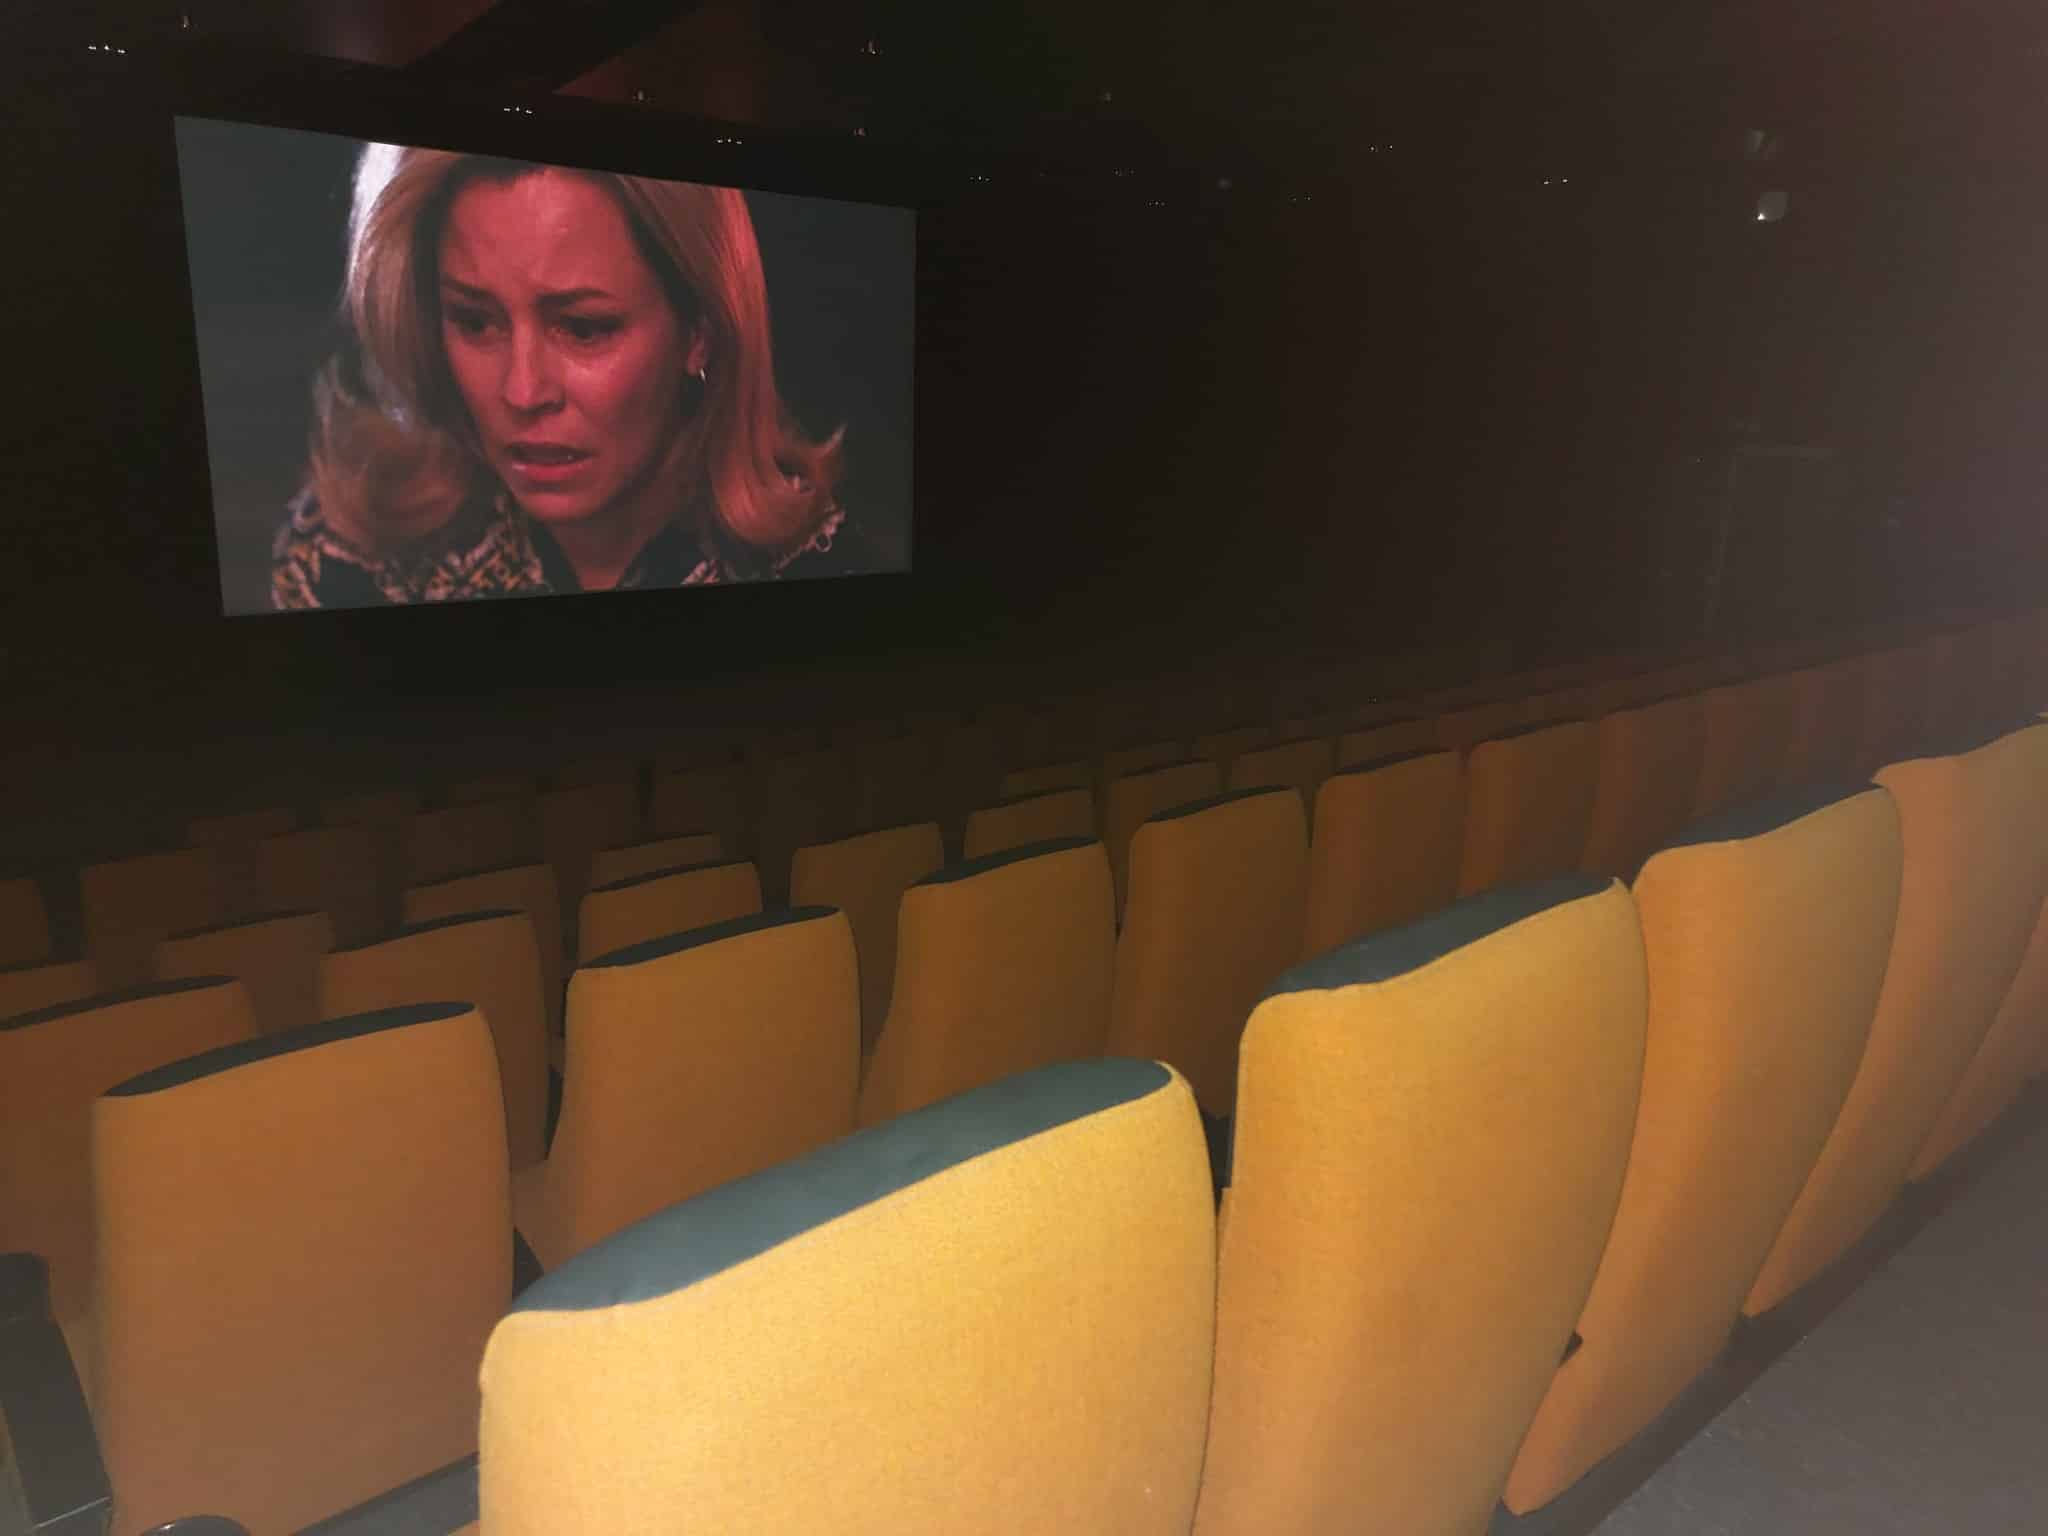 Elizabeth Banks gazes with horror at the totally empty theater where Call Jane is being screened.